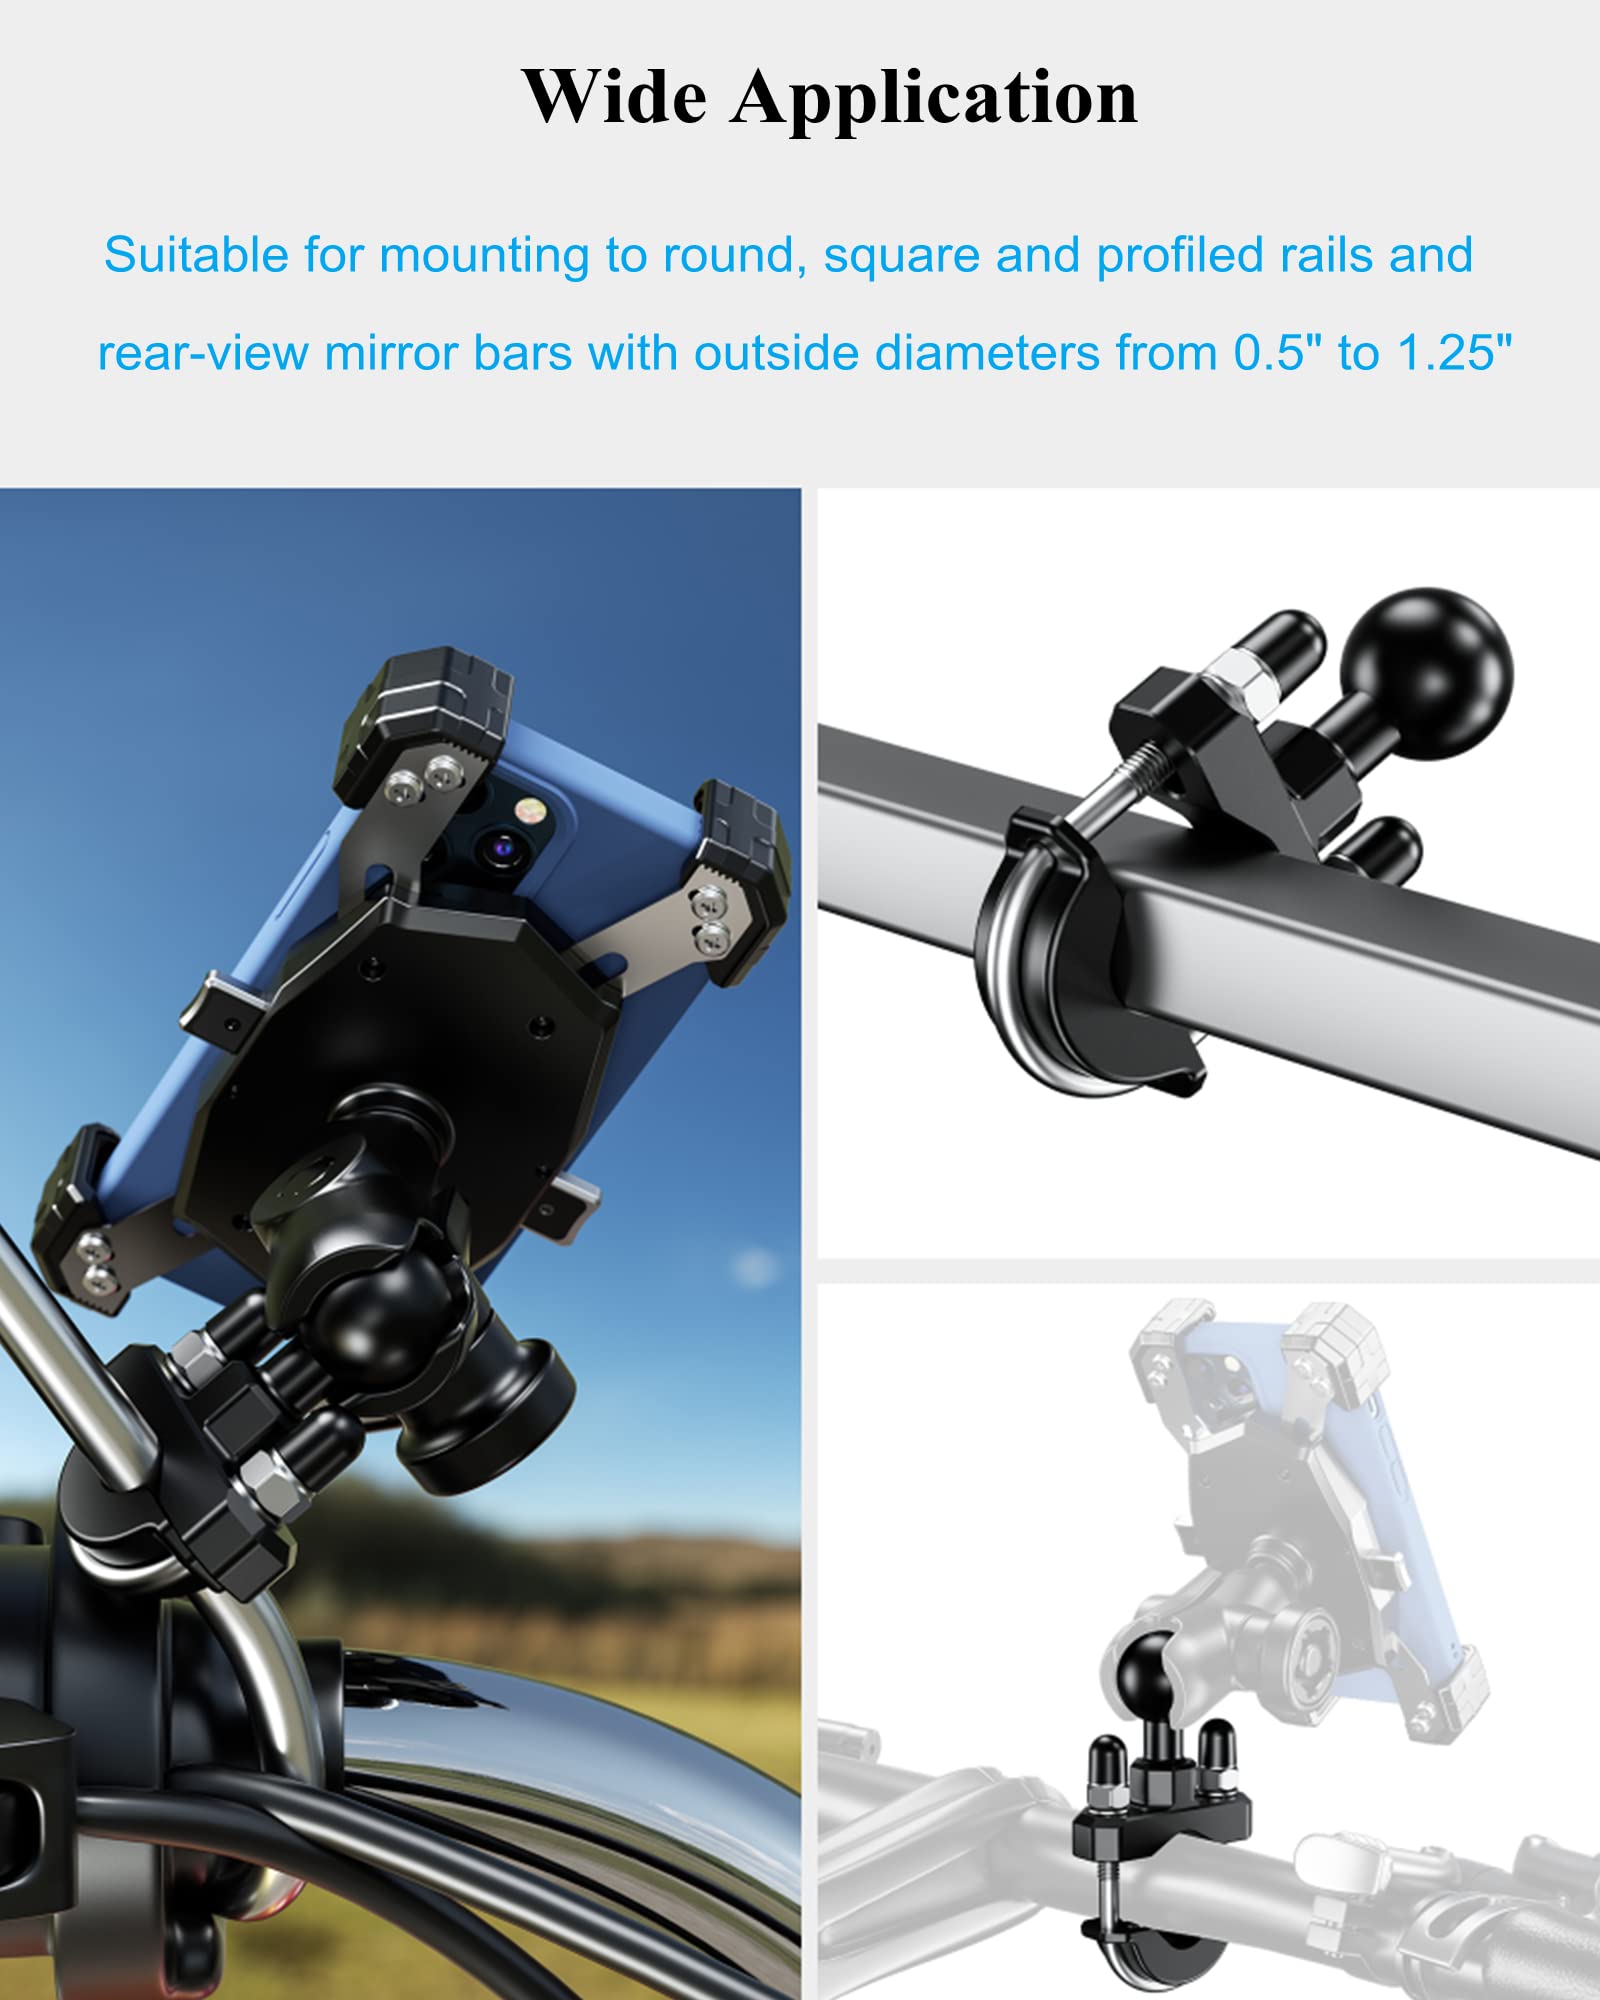 BRCOVAN Handlebar U-Bolt Mount Base with 1'' TPU Ball for Rails 0.5'' to 1.25'' in Diameter, Compatible with RAM Mounts B Size 1 inch Ball Double Socket Arm & Bike Motorcycle Phone Holder